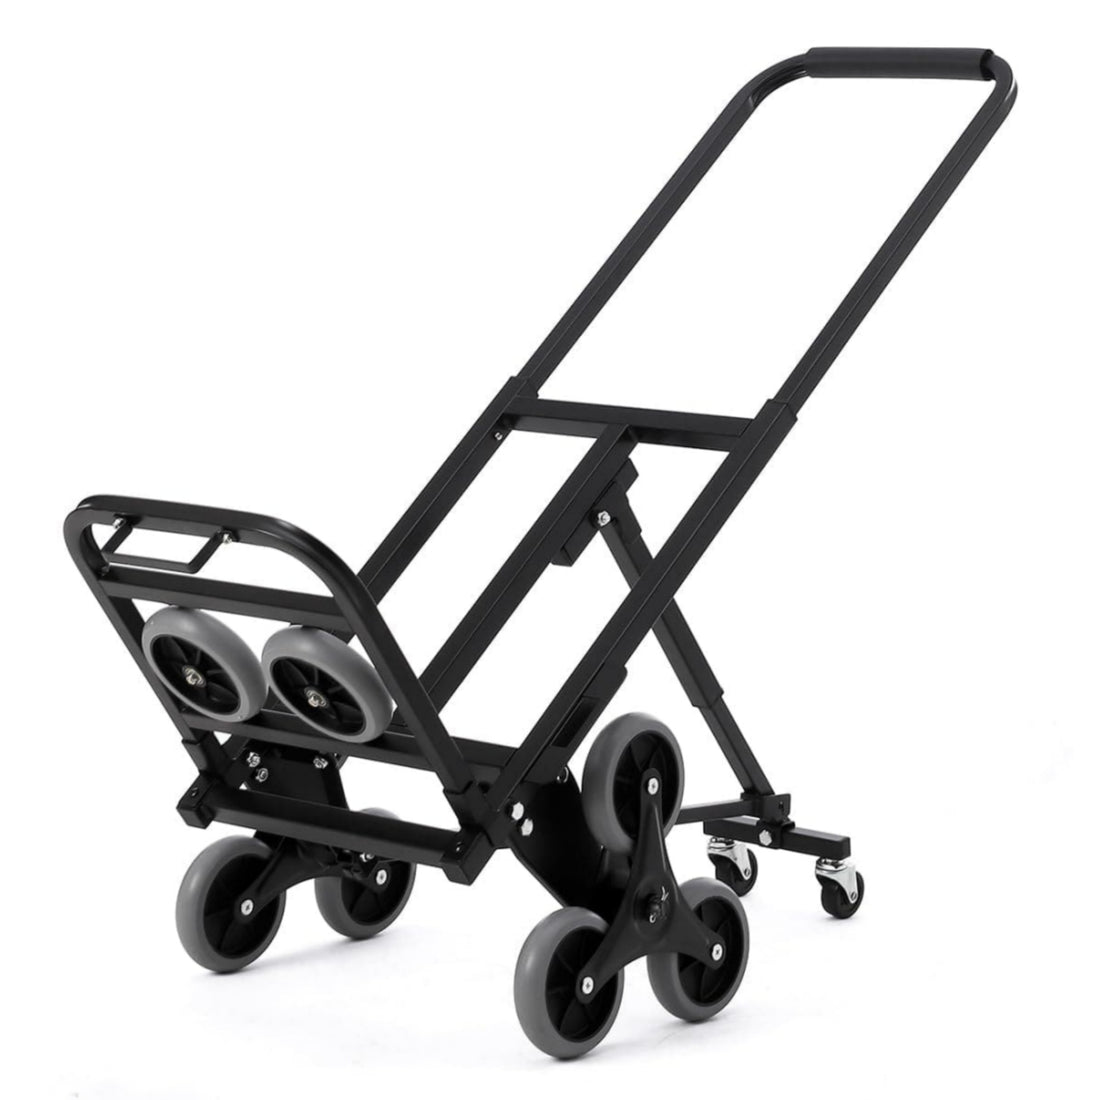 Stair Climbing Cart, 330 LB Climber Hand Truck Dolly with Adjustable Handle, Portable Folding Dolly Cart for Stairs, Stair Climbing Dolly Hand Carts with 10 Wheels for Shopping Moving Office Use